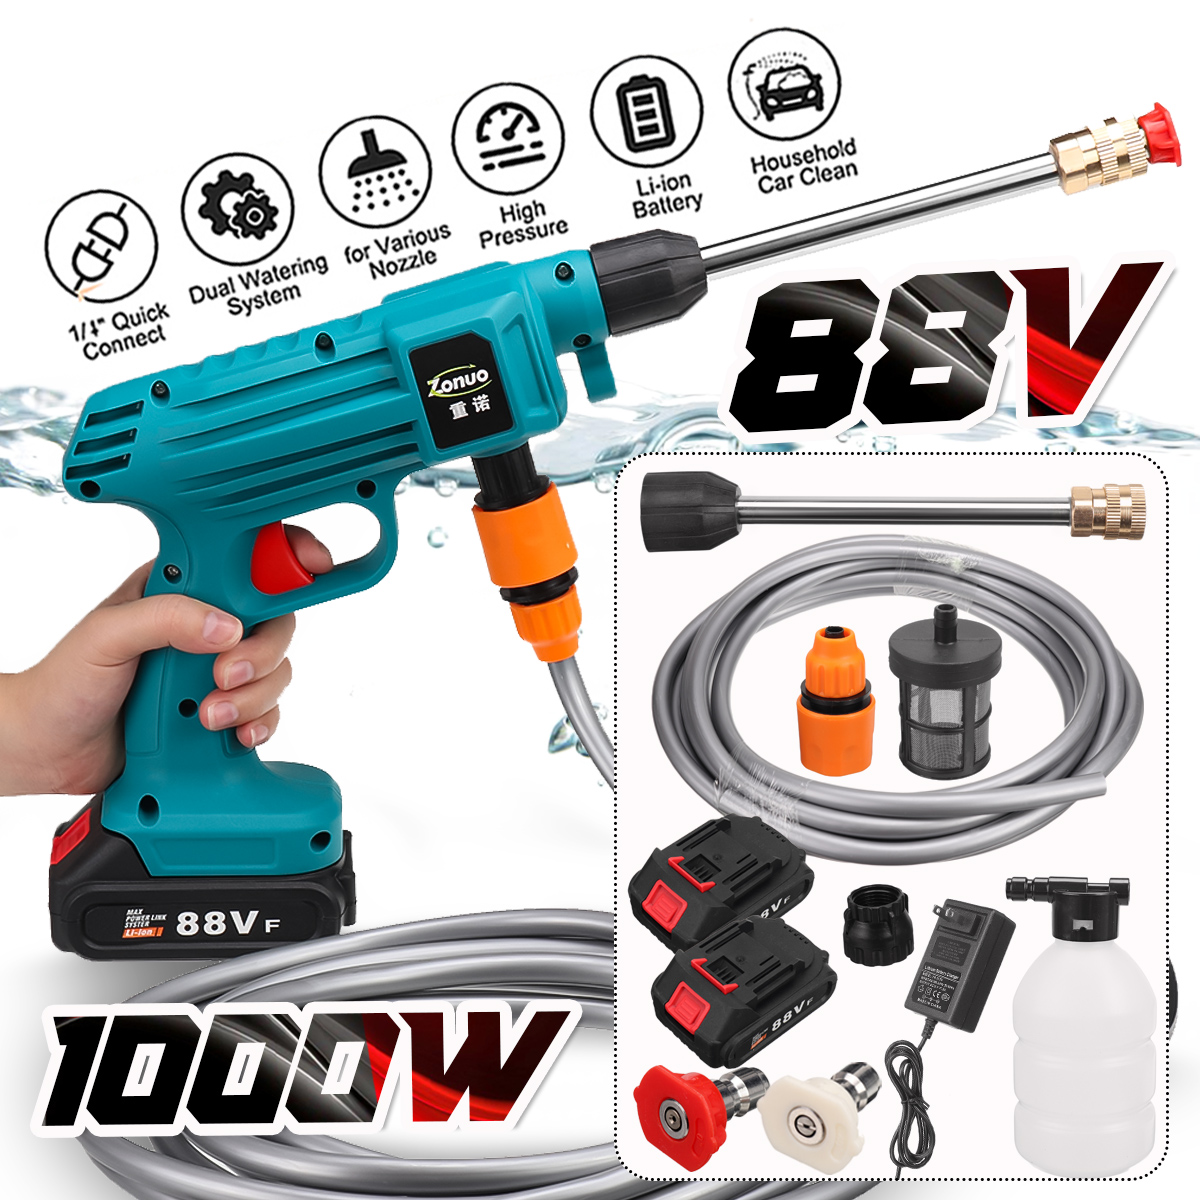 88VF-Cordless-High-Pressure-Washer-Car-Washing-Spray-Guns-Water-Cleaner-W-12-Battery-For-MAKITA-1870563-2